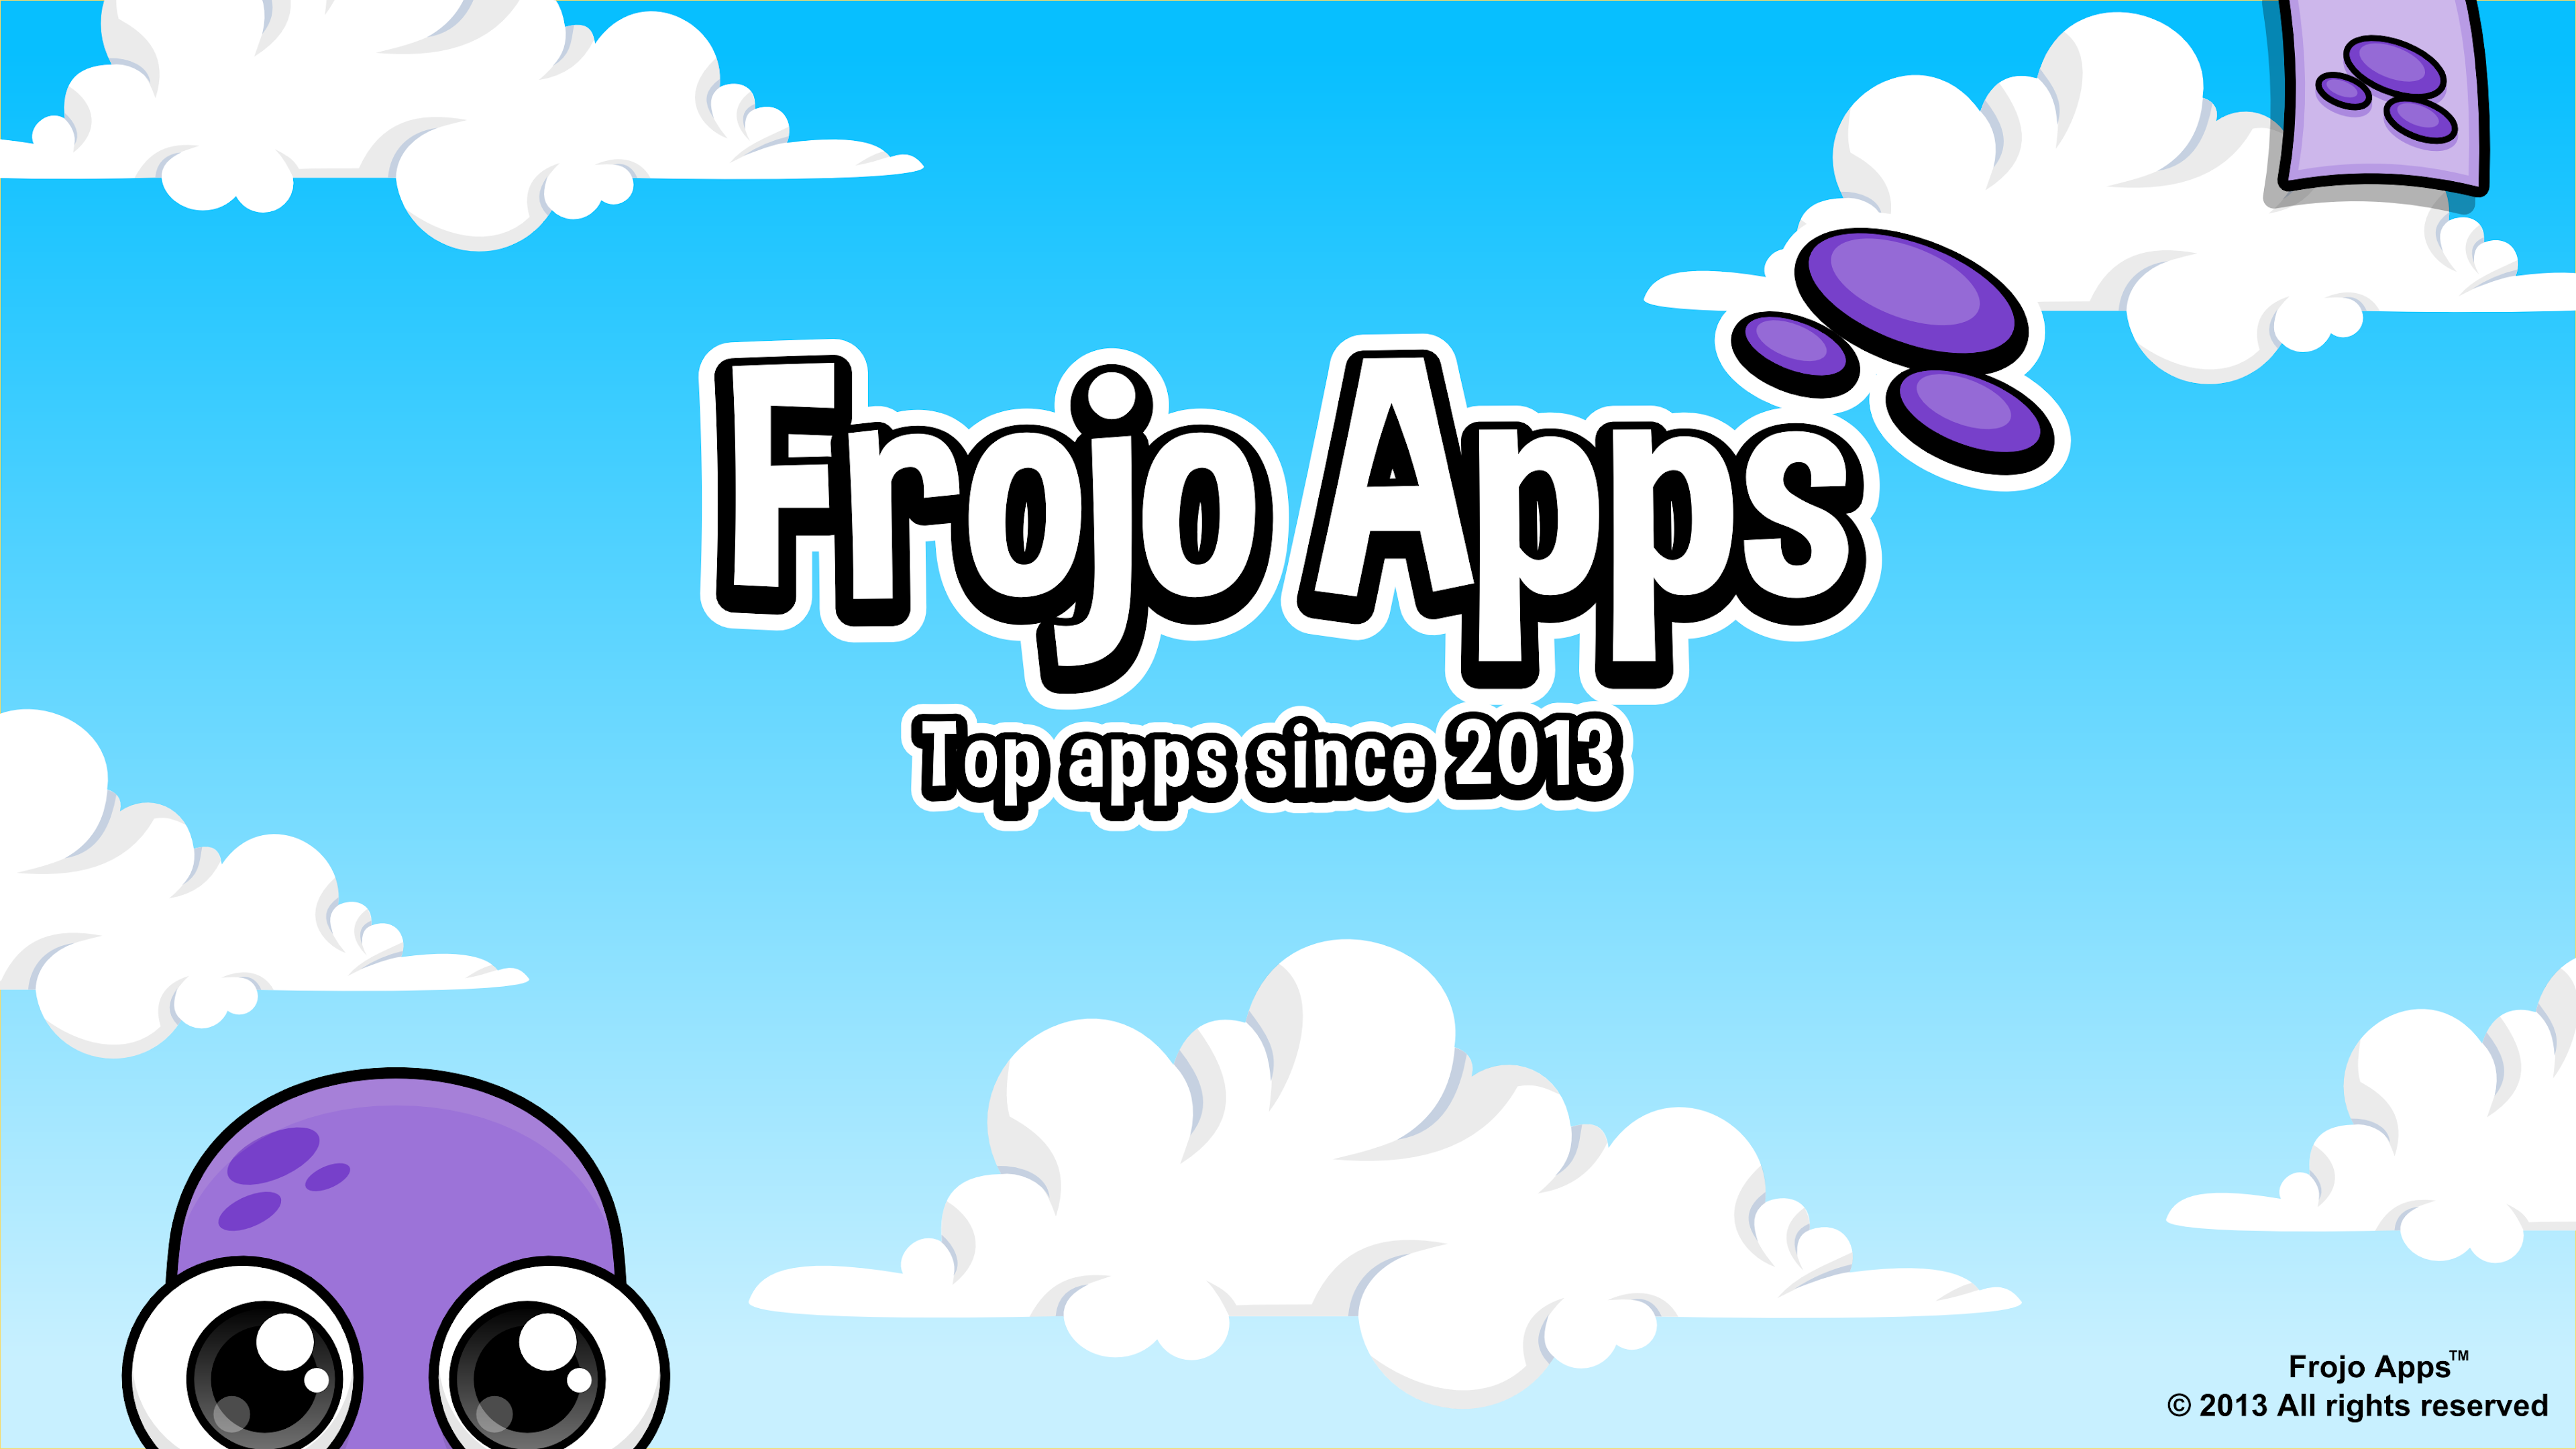 Android Apps by Frojo Apps on Google Play